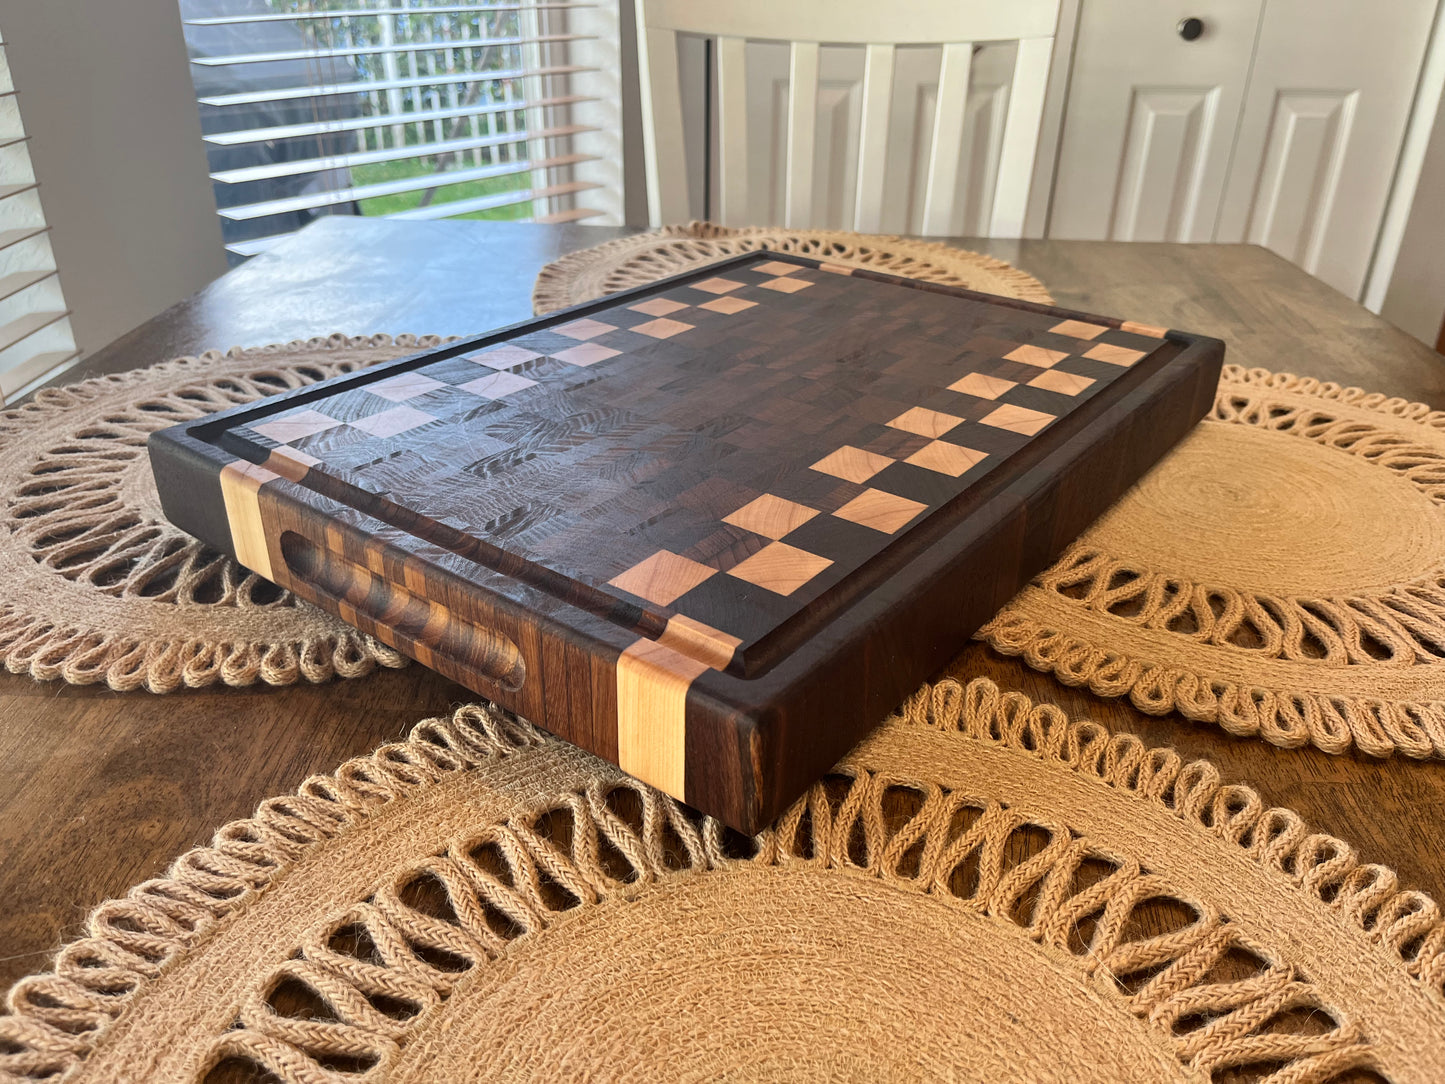 The “Senior Chief”! Cutting Board and Butcher Block